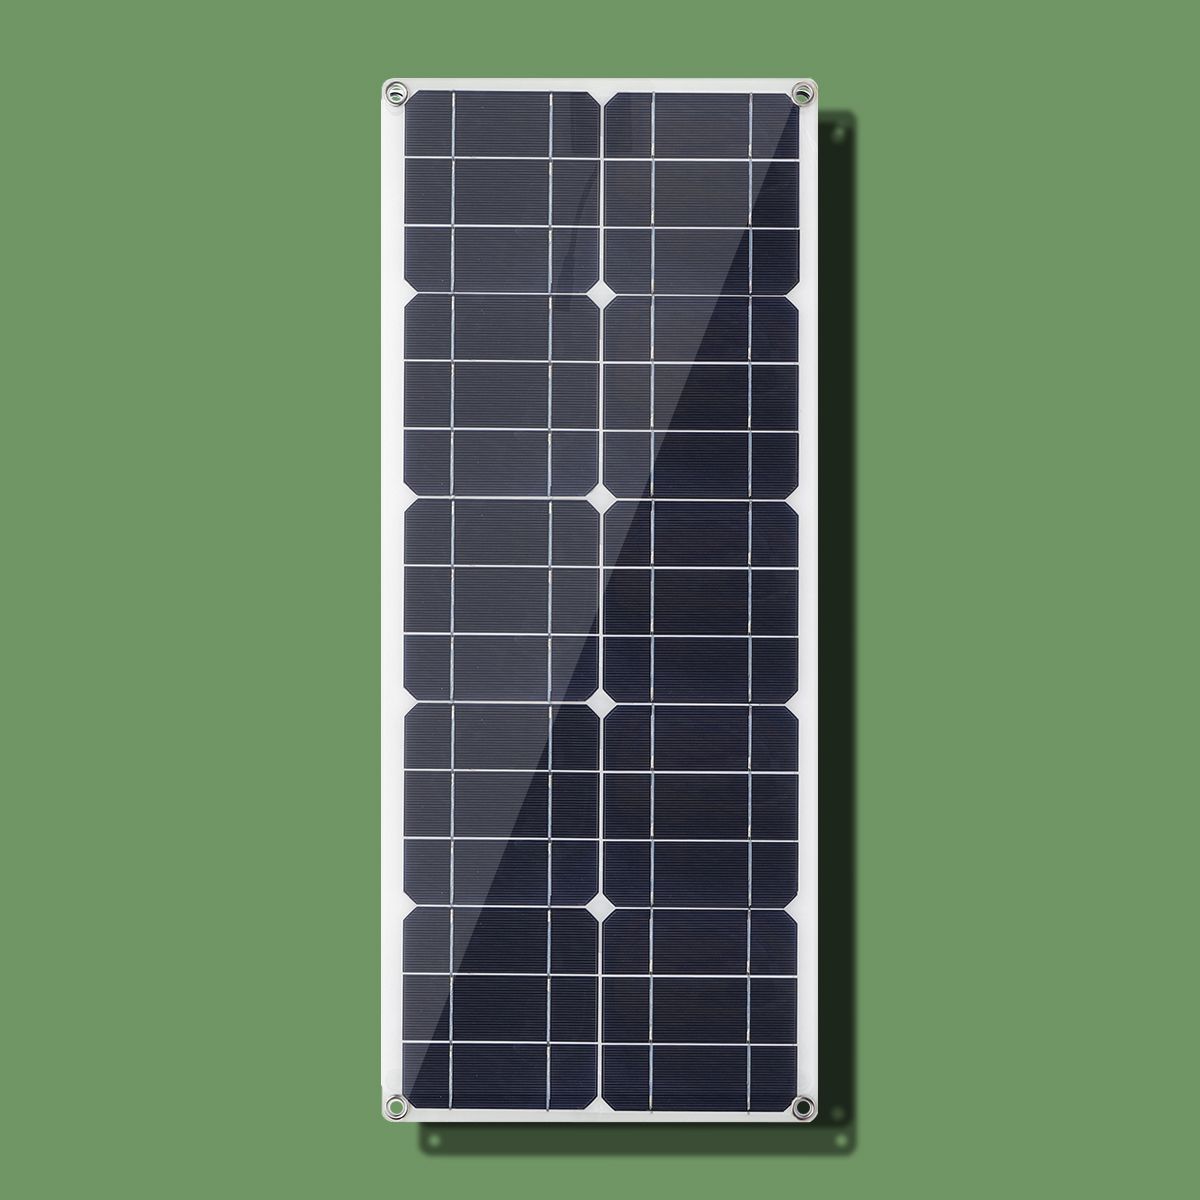 100W-18V-MonocrystalineSolar-Panel-Dual-12V5V-DC-USB-Charger-Kit-with-10A-Solar-Controller-amp-Cable-1558949